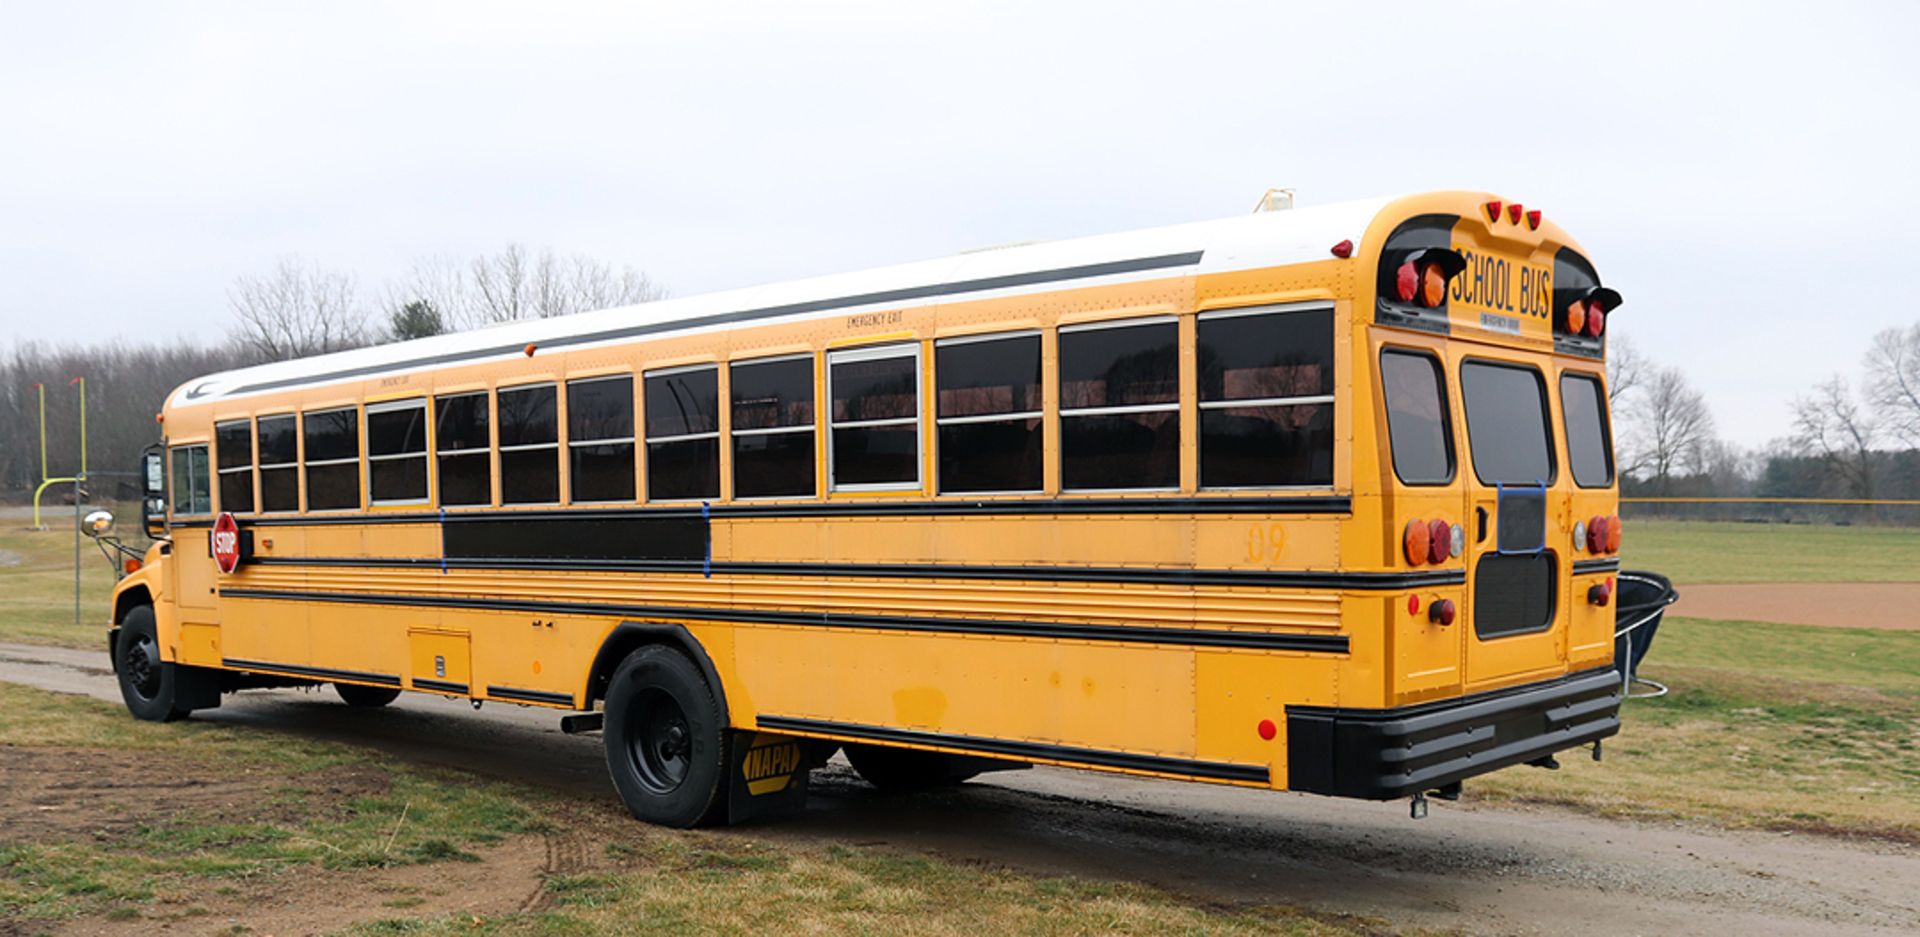 2010 Bluebird School Bus with Cummins Engine, 142k miles, VIN 1BAKJCPAOBF278655 - Image 5 of 16